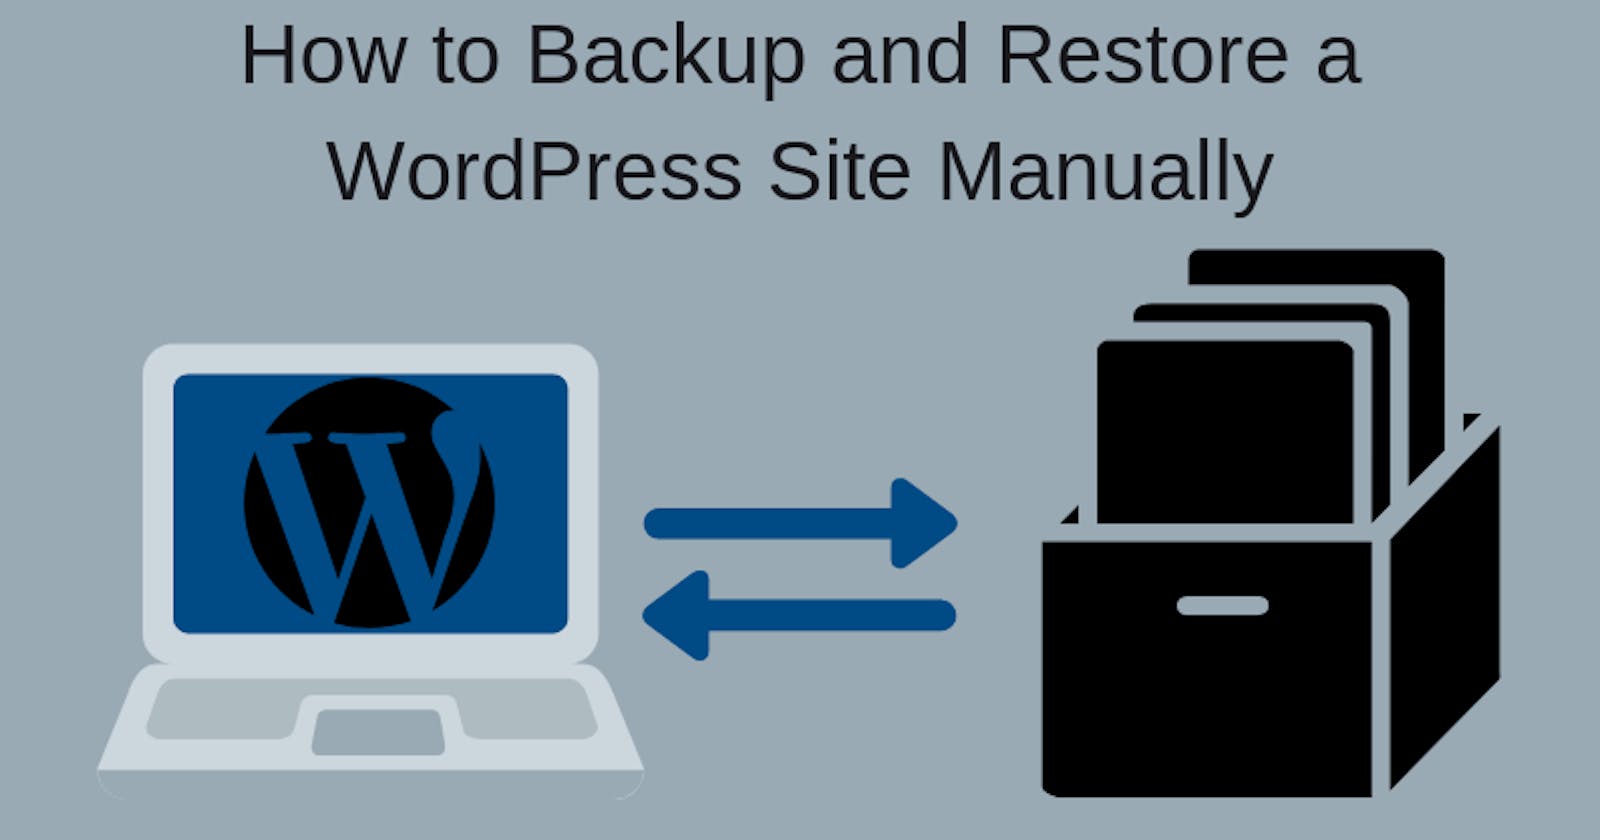 How to backup and restore WordPress site manually.